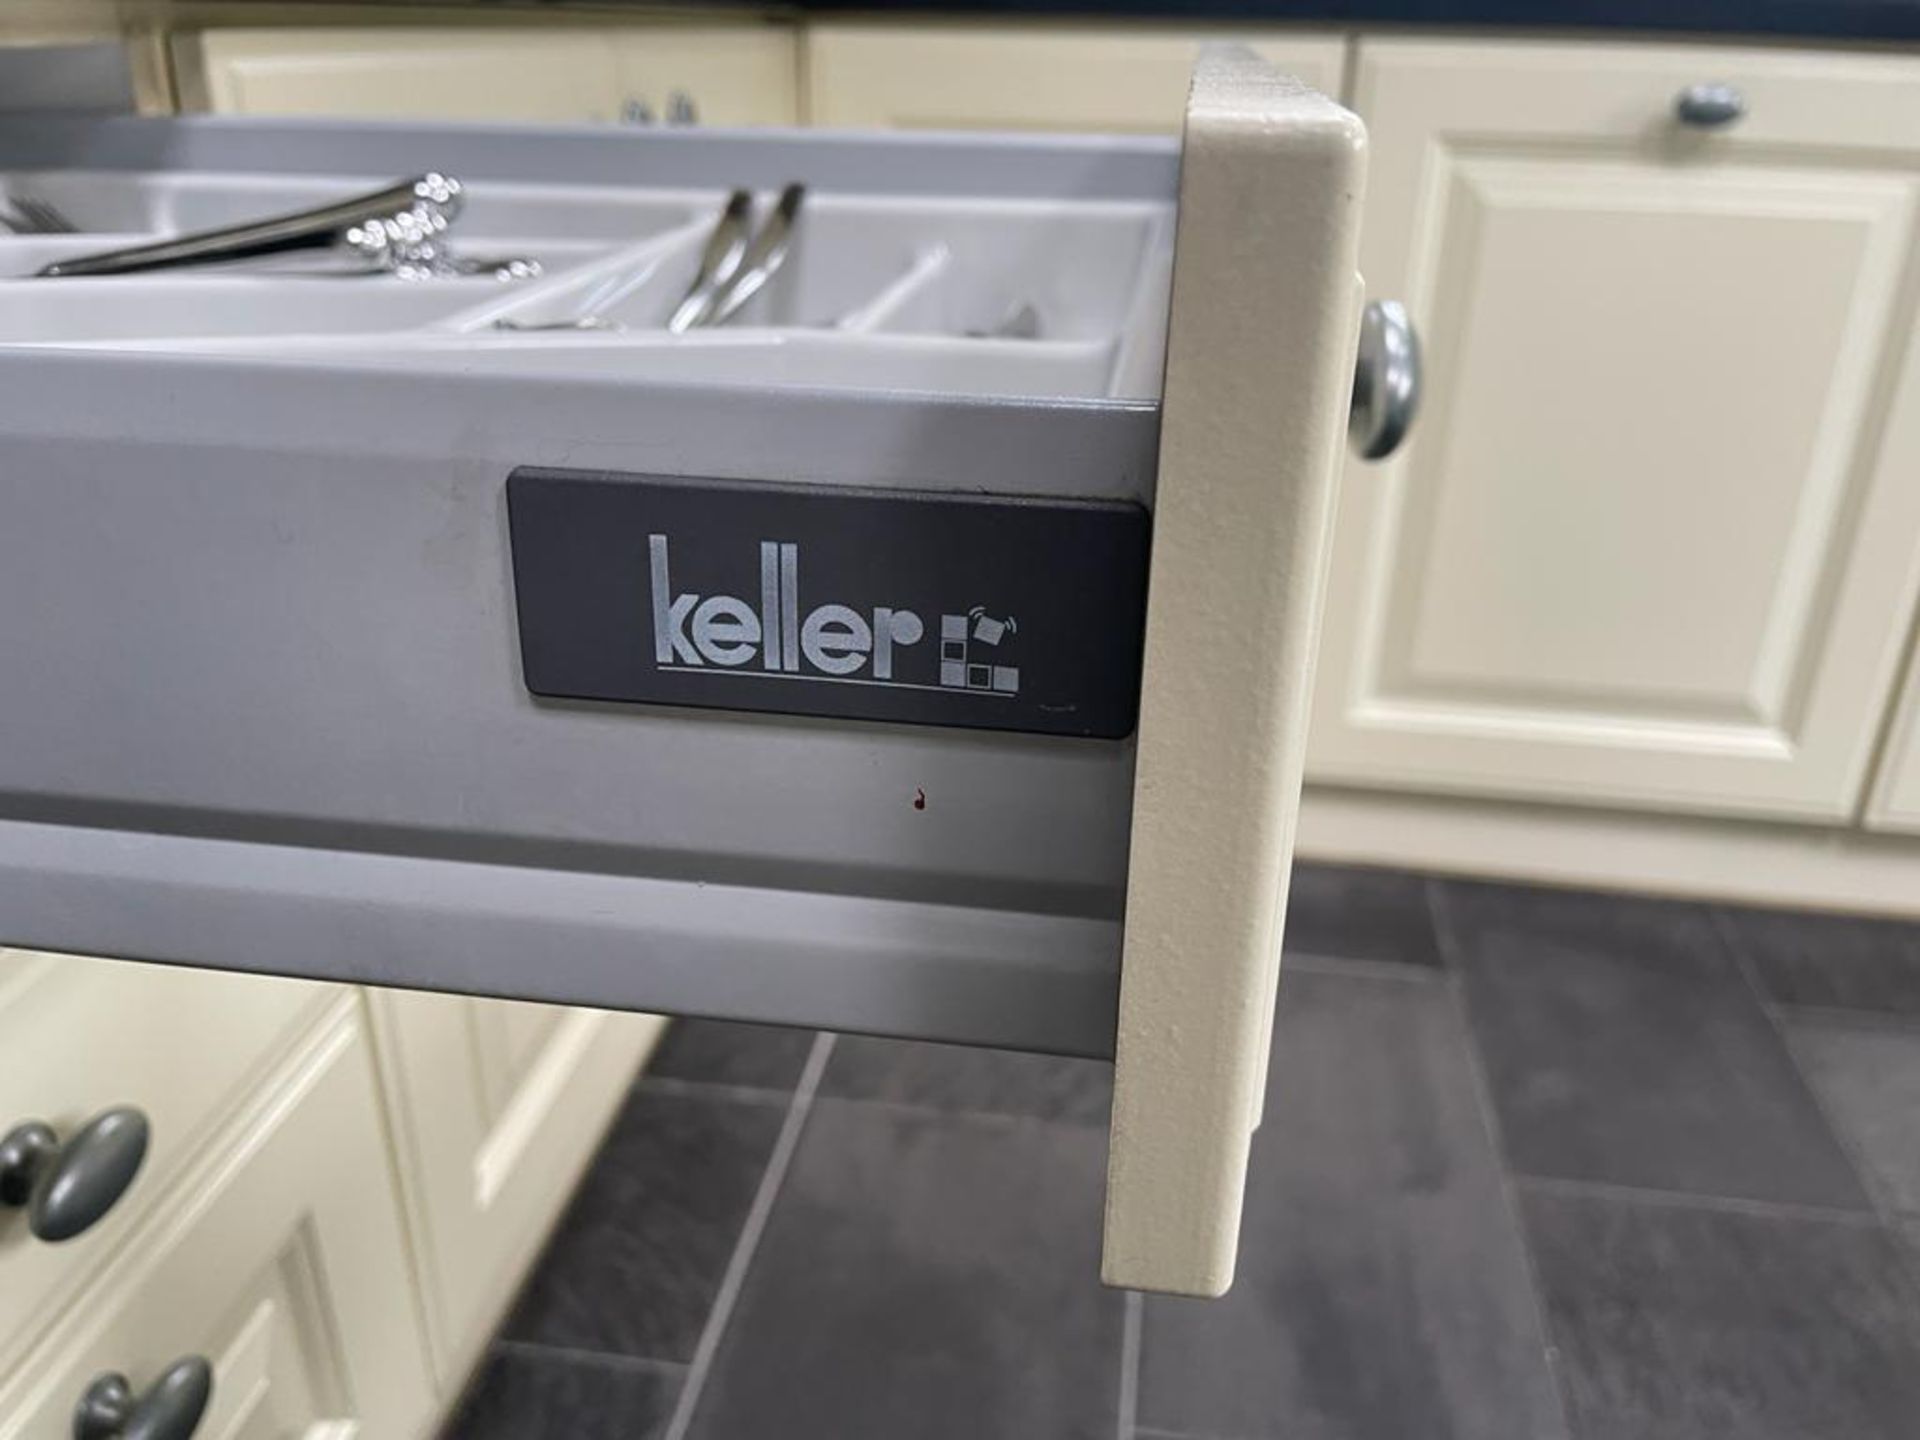 1 x Bespoke Keller Kitchen With Branded Appliances - From An Exclusive Property - No VAT On The - Image 75 of 127